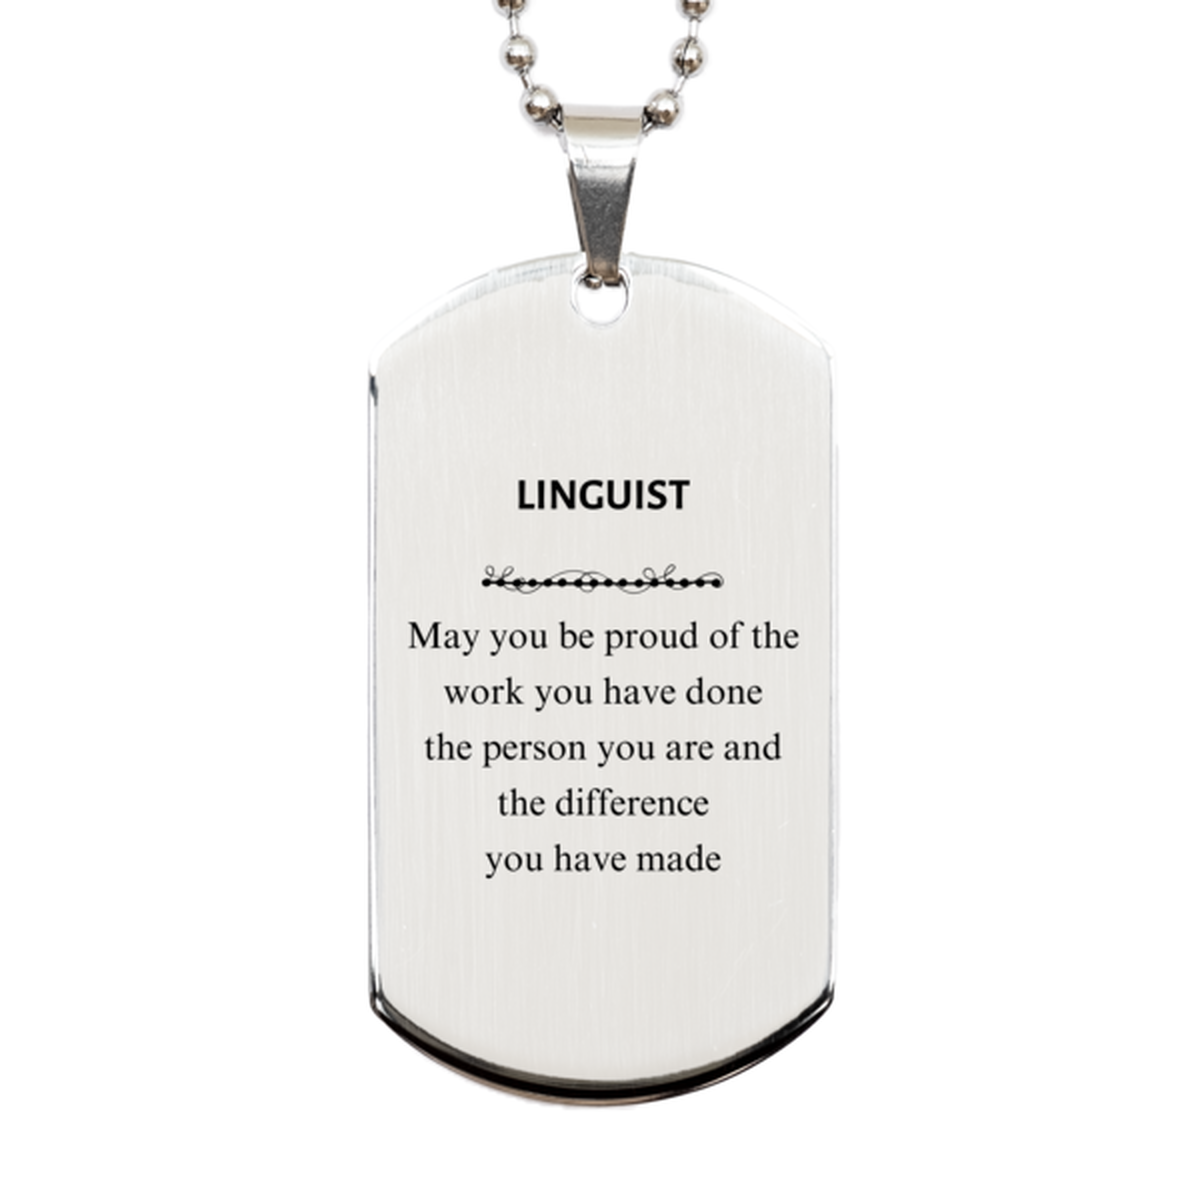 Linguist May you be proud of the work you have done, Retirement Linguist Silver Dog Tag for Colleague Appreciation Gifts Amazing for Linguist